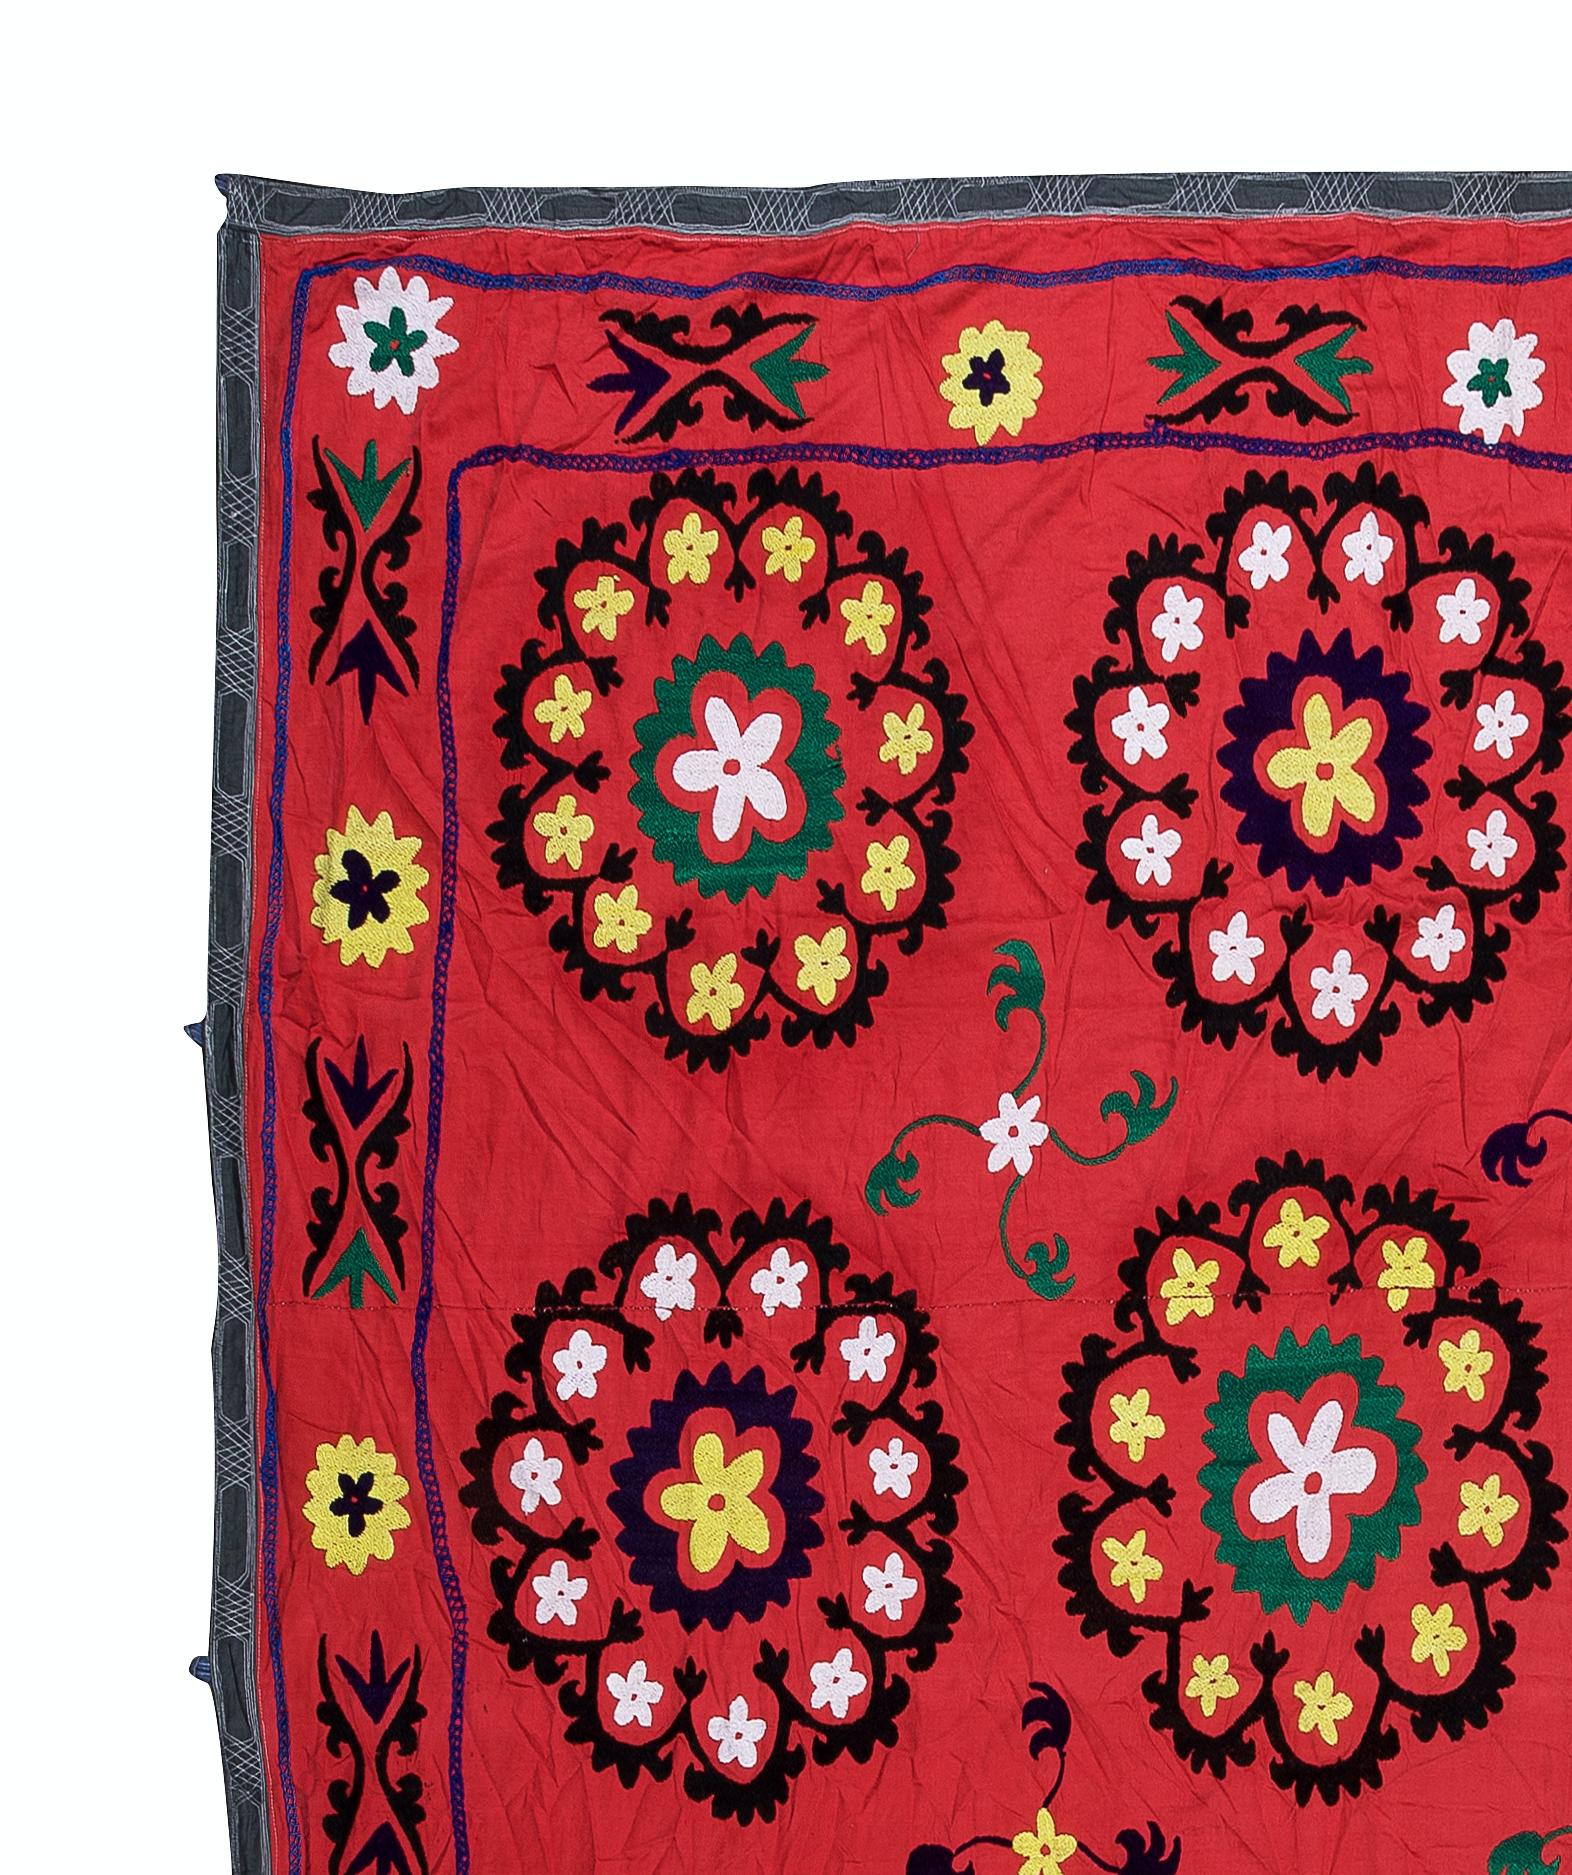 Suzani 7.9x7.9 Ft Vintage Silk Embroidery Bed Cover, Uzbek Tablecloth, Red Wall Hanging For Sale